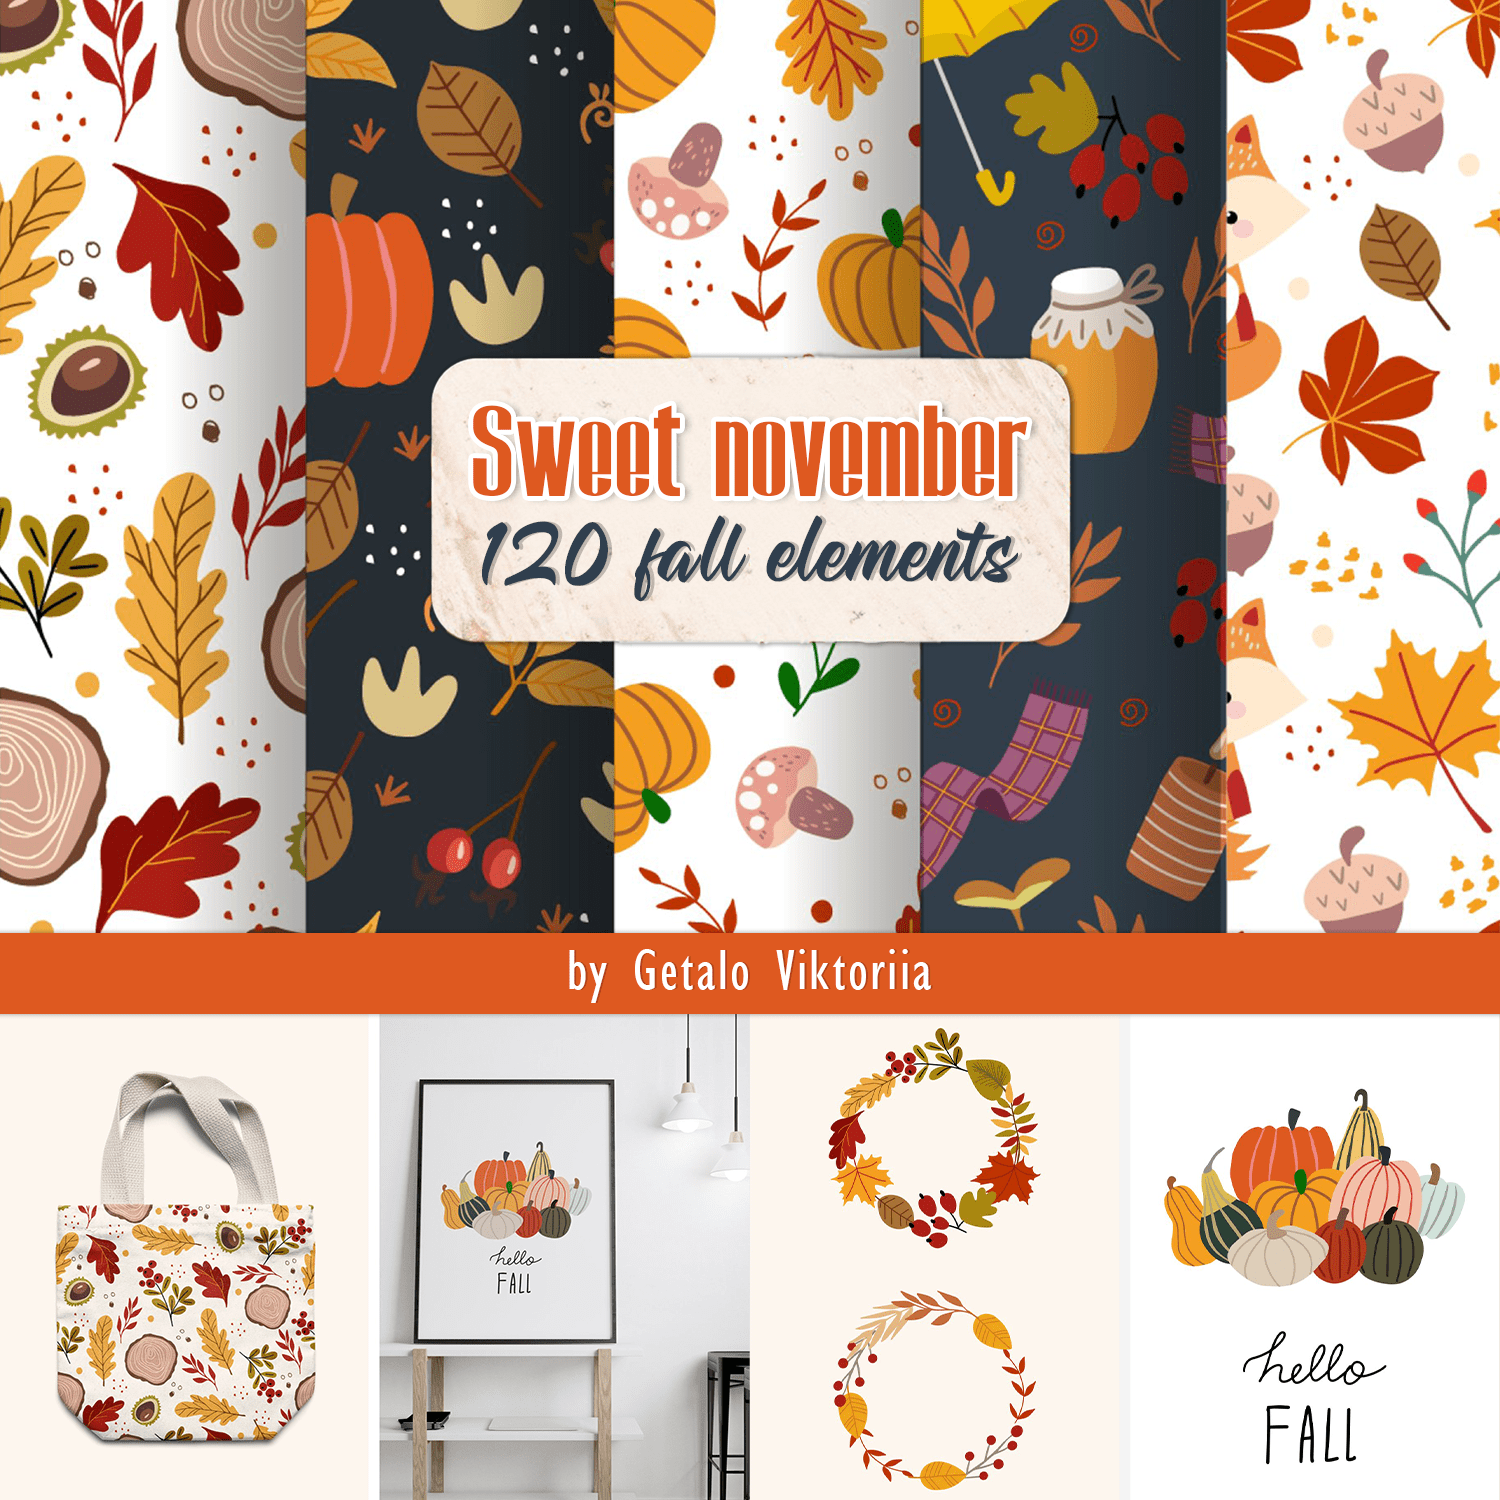 Sweet november. 120 fall elements. cover.